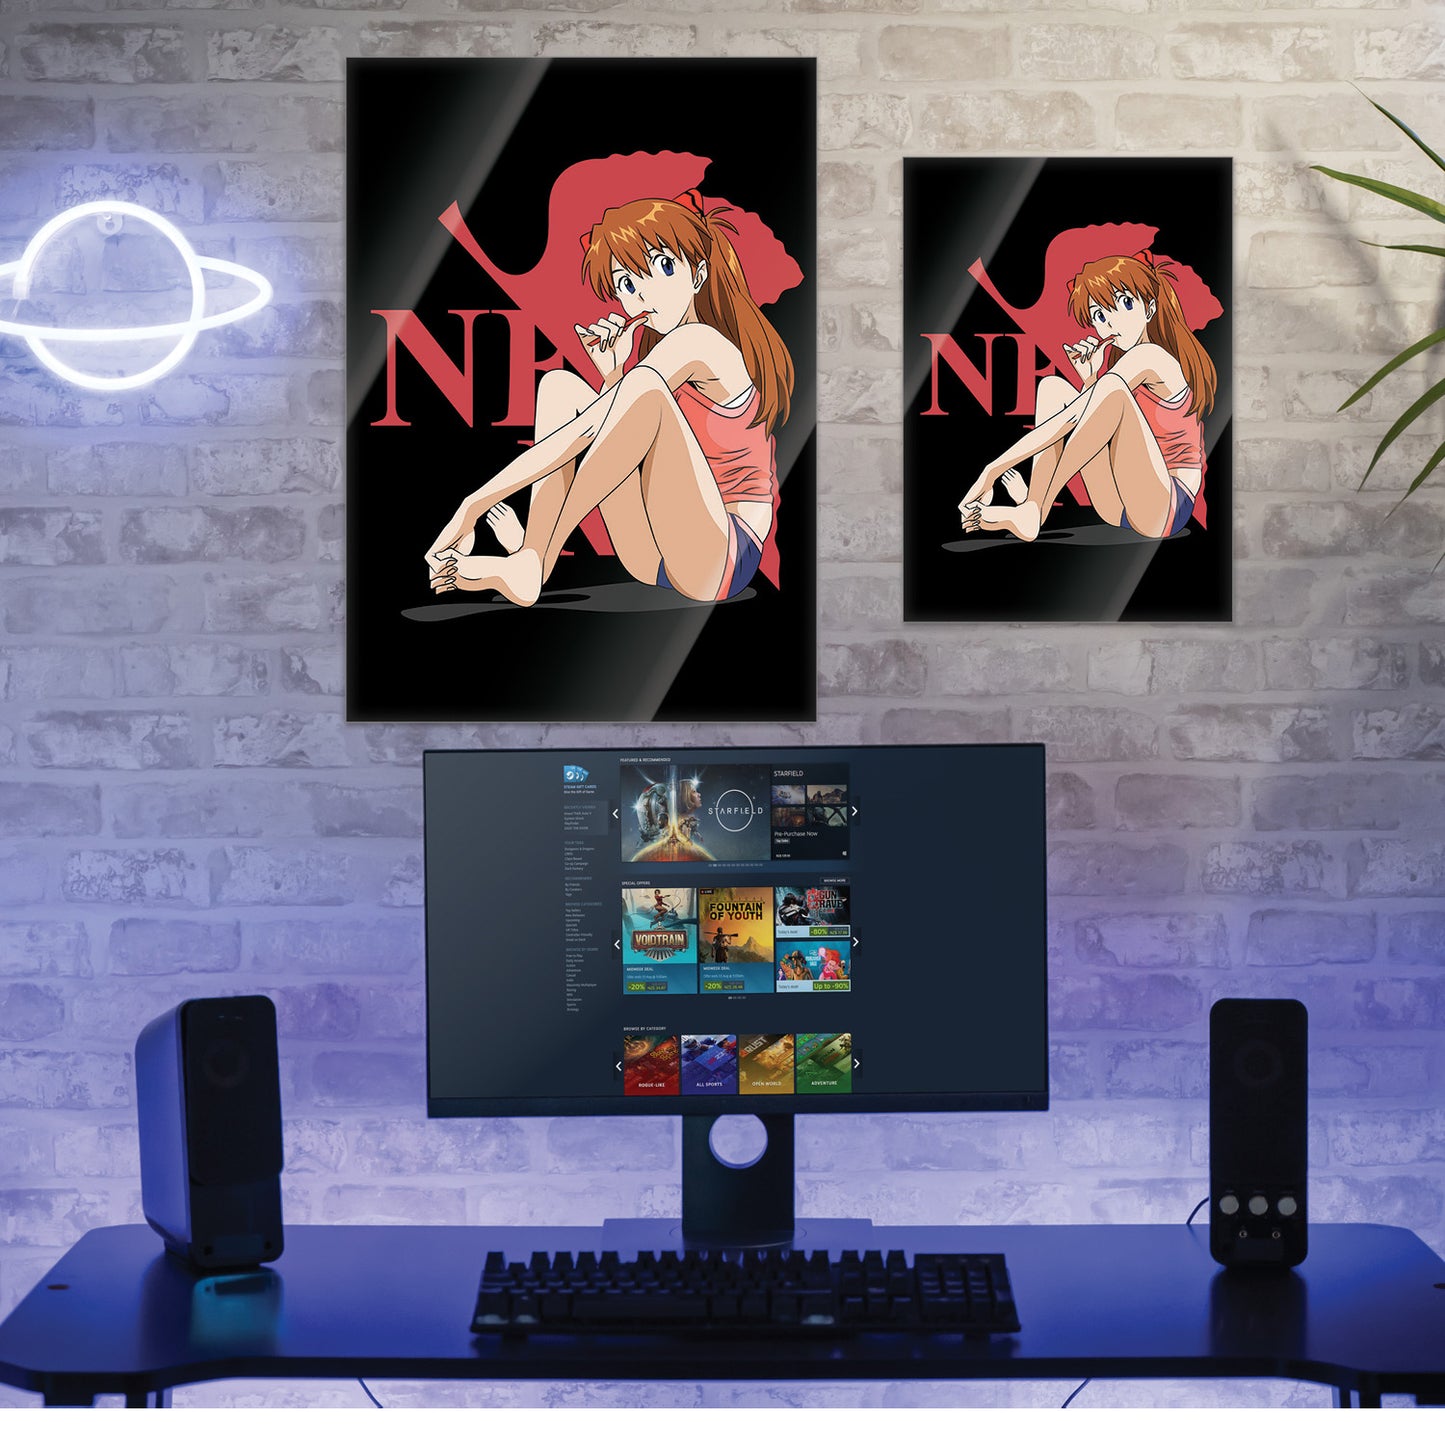 Asuka after hours